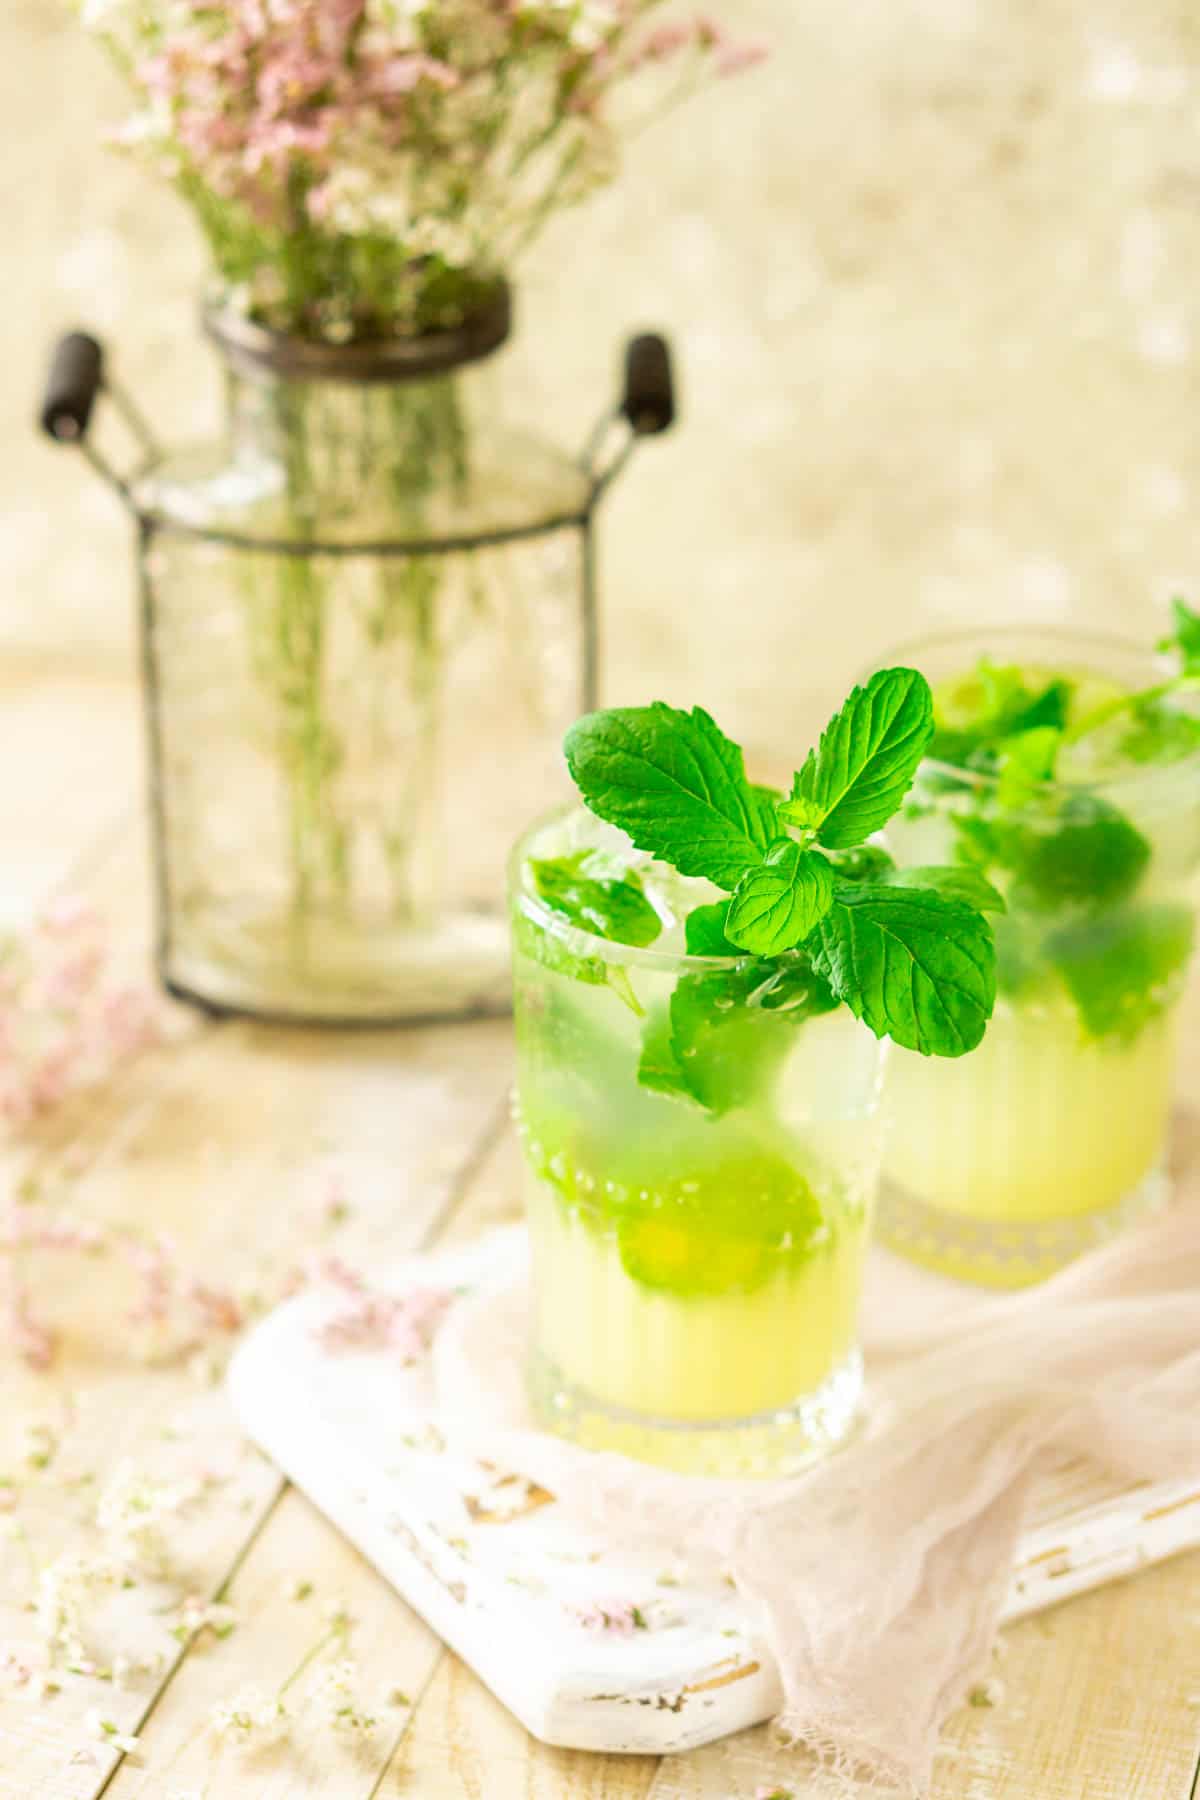 A side view of the ginger mojito on a white tray with flowers around it.